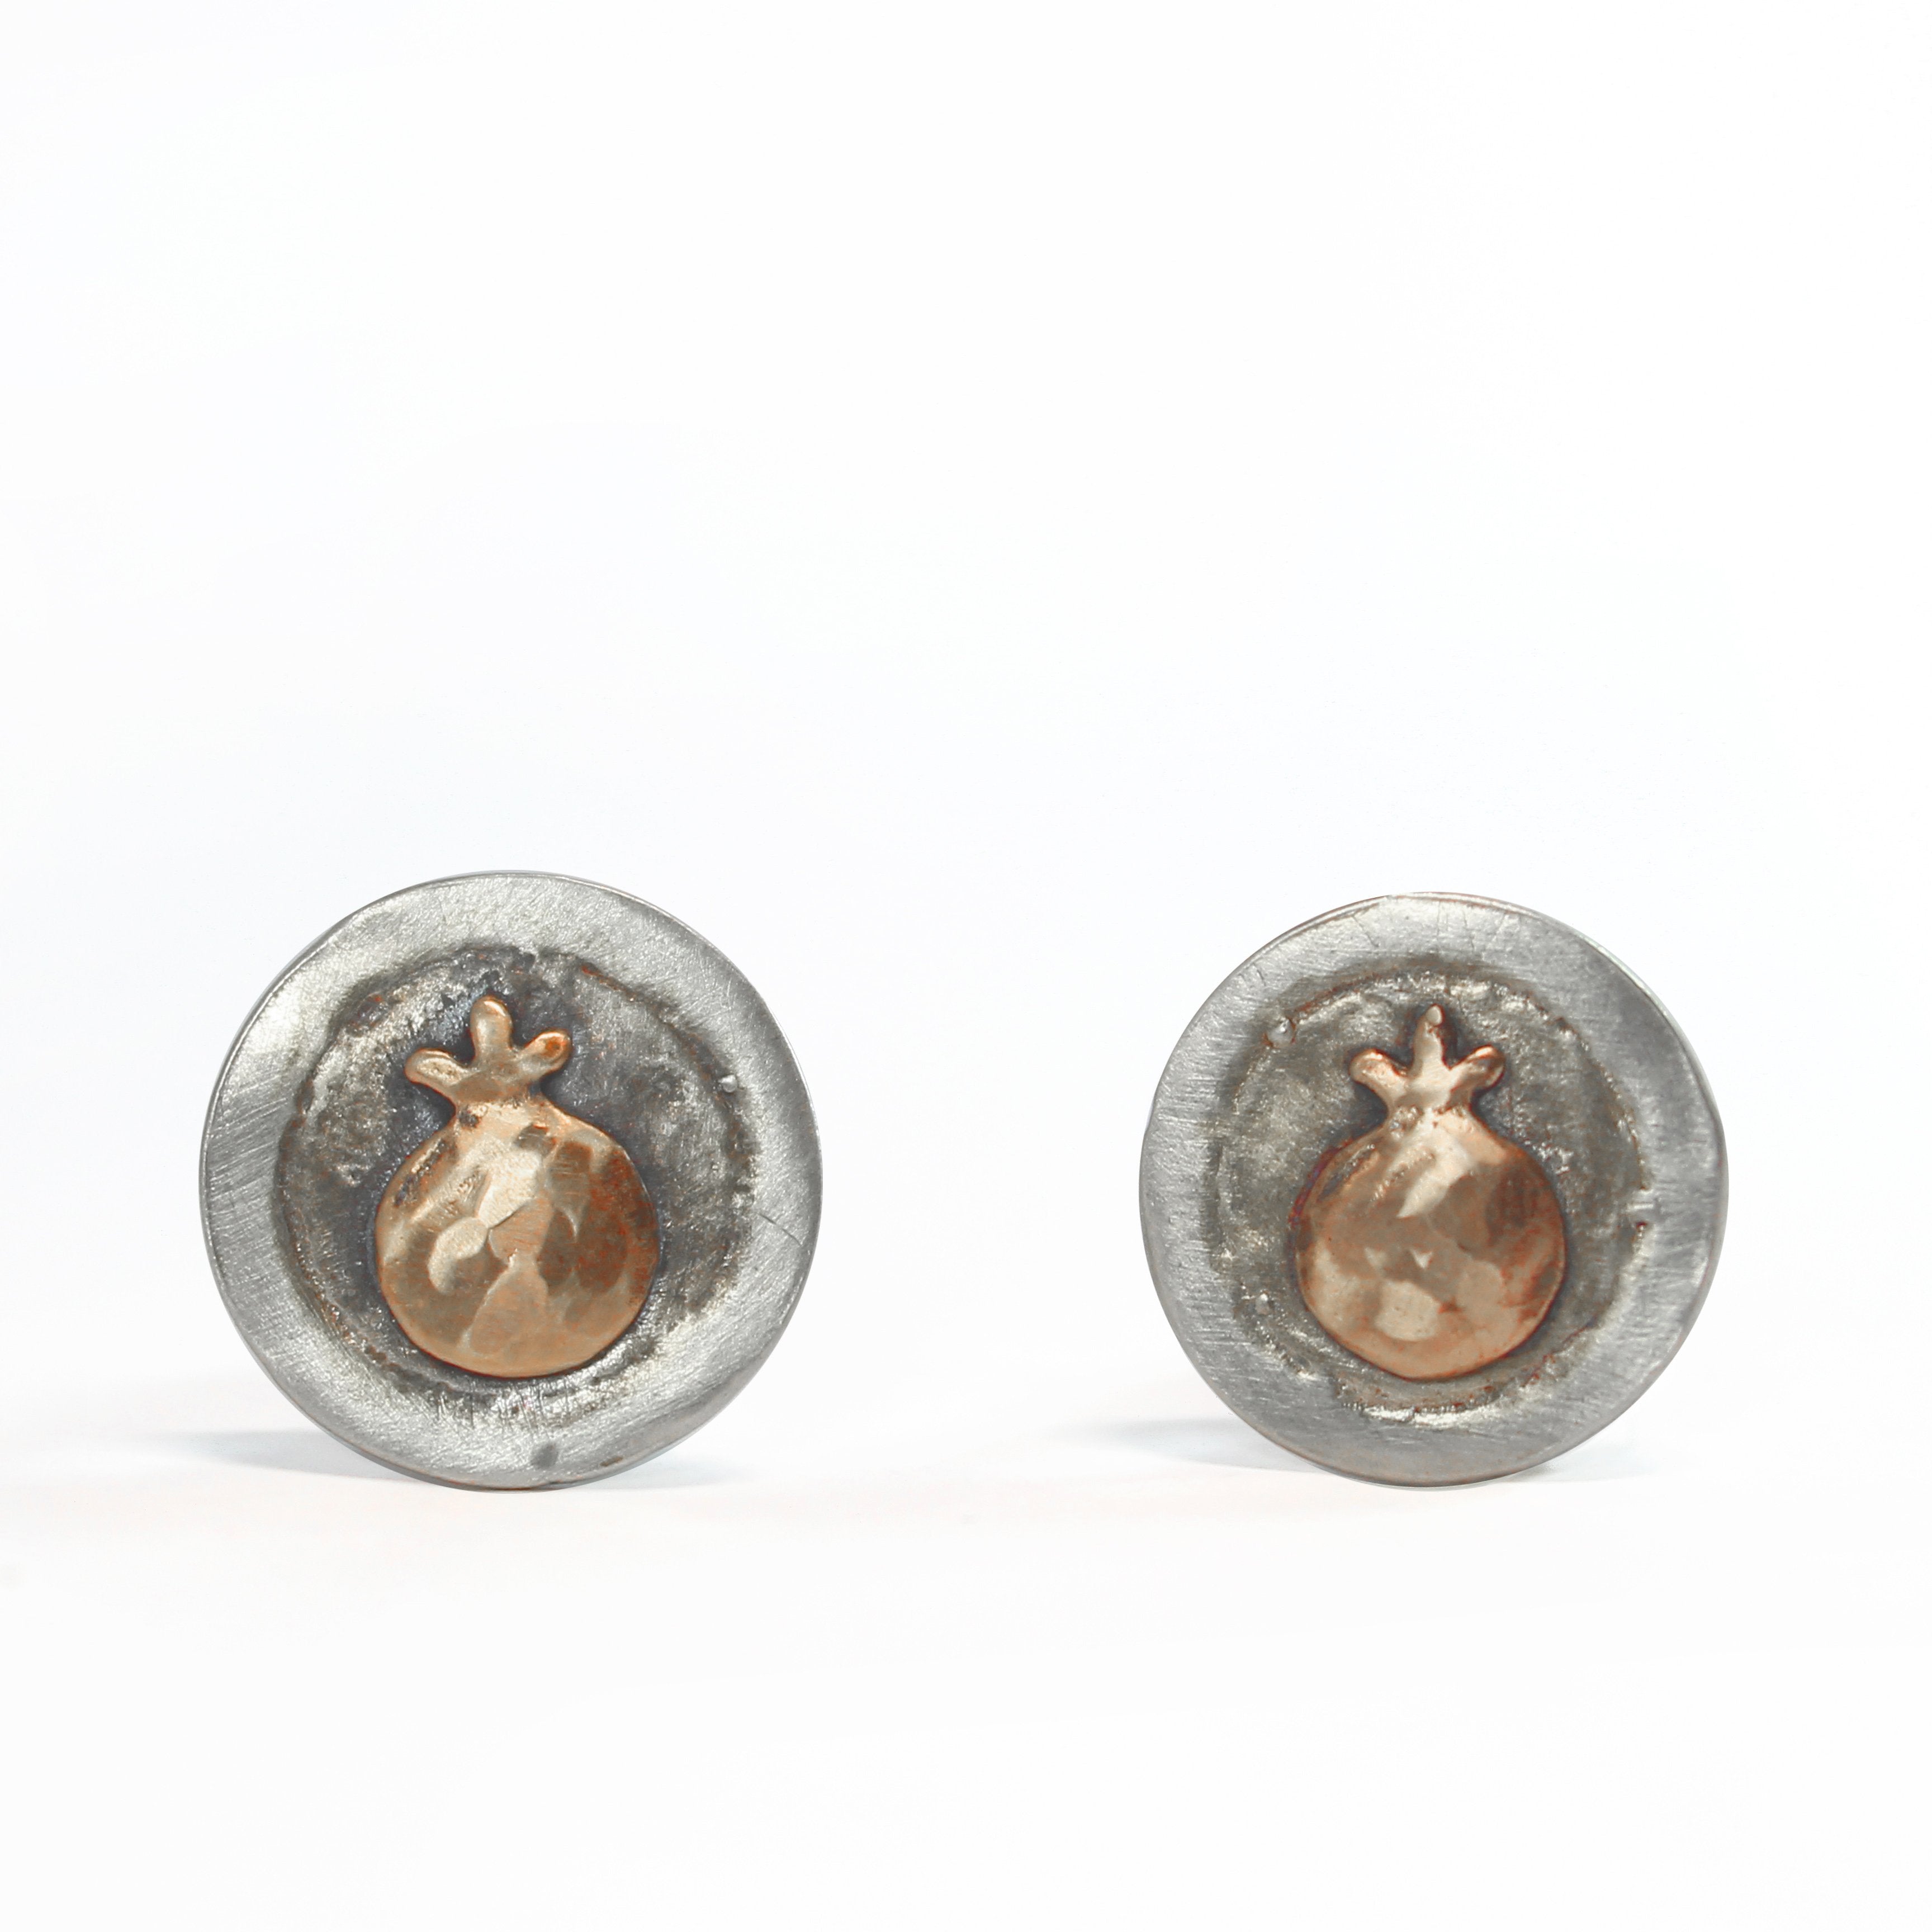 Silver & Red Gold Pomegranate Cufflinks - Shulamit Kanter Official Store